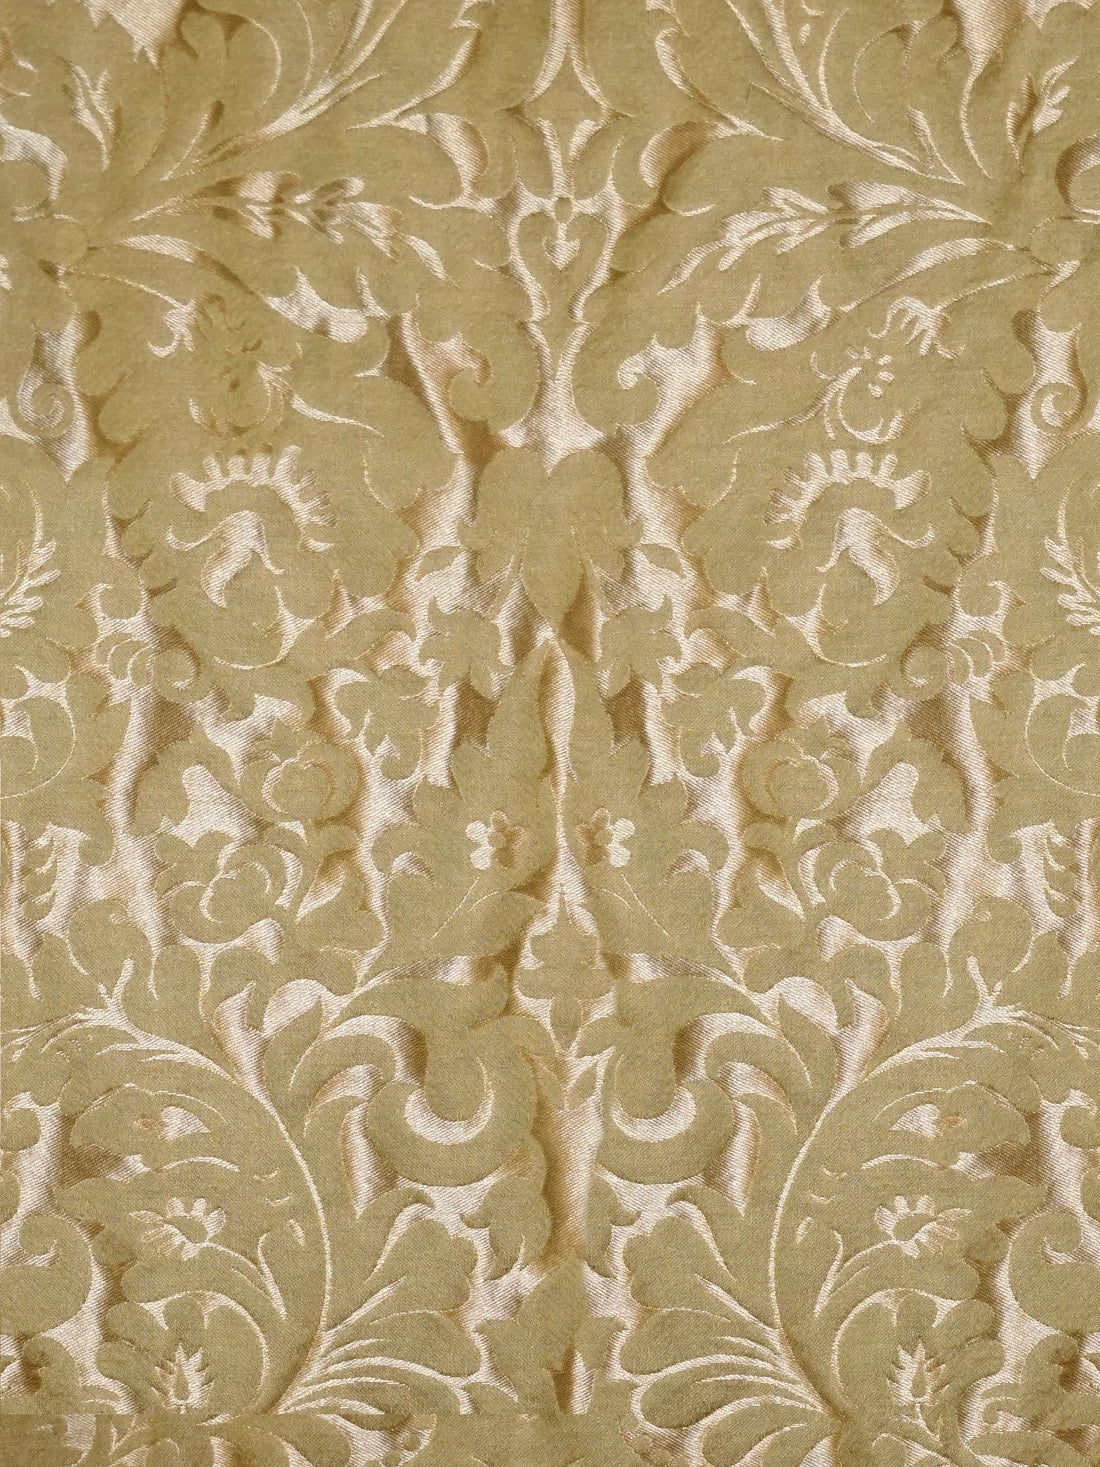 Mariella fabric in foglia color - pattern number SB 80011653 - by Scalamandre in the Old World Weavers collection